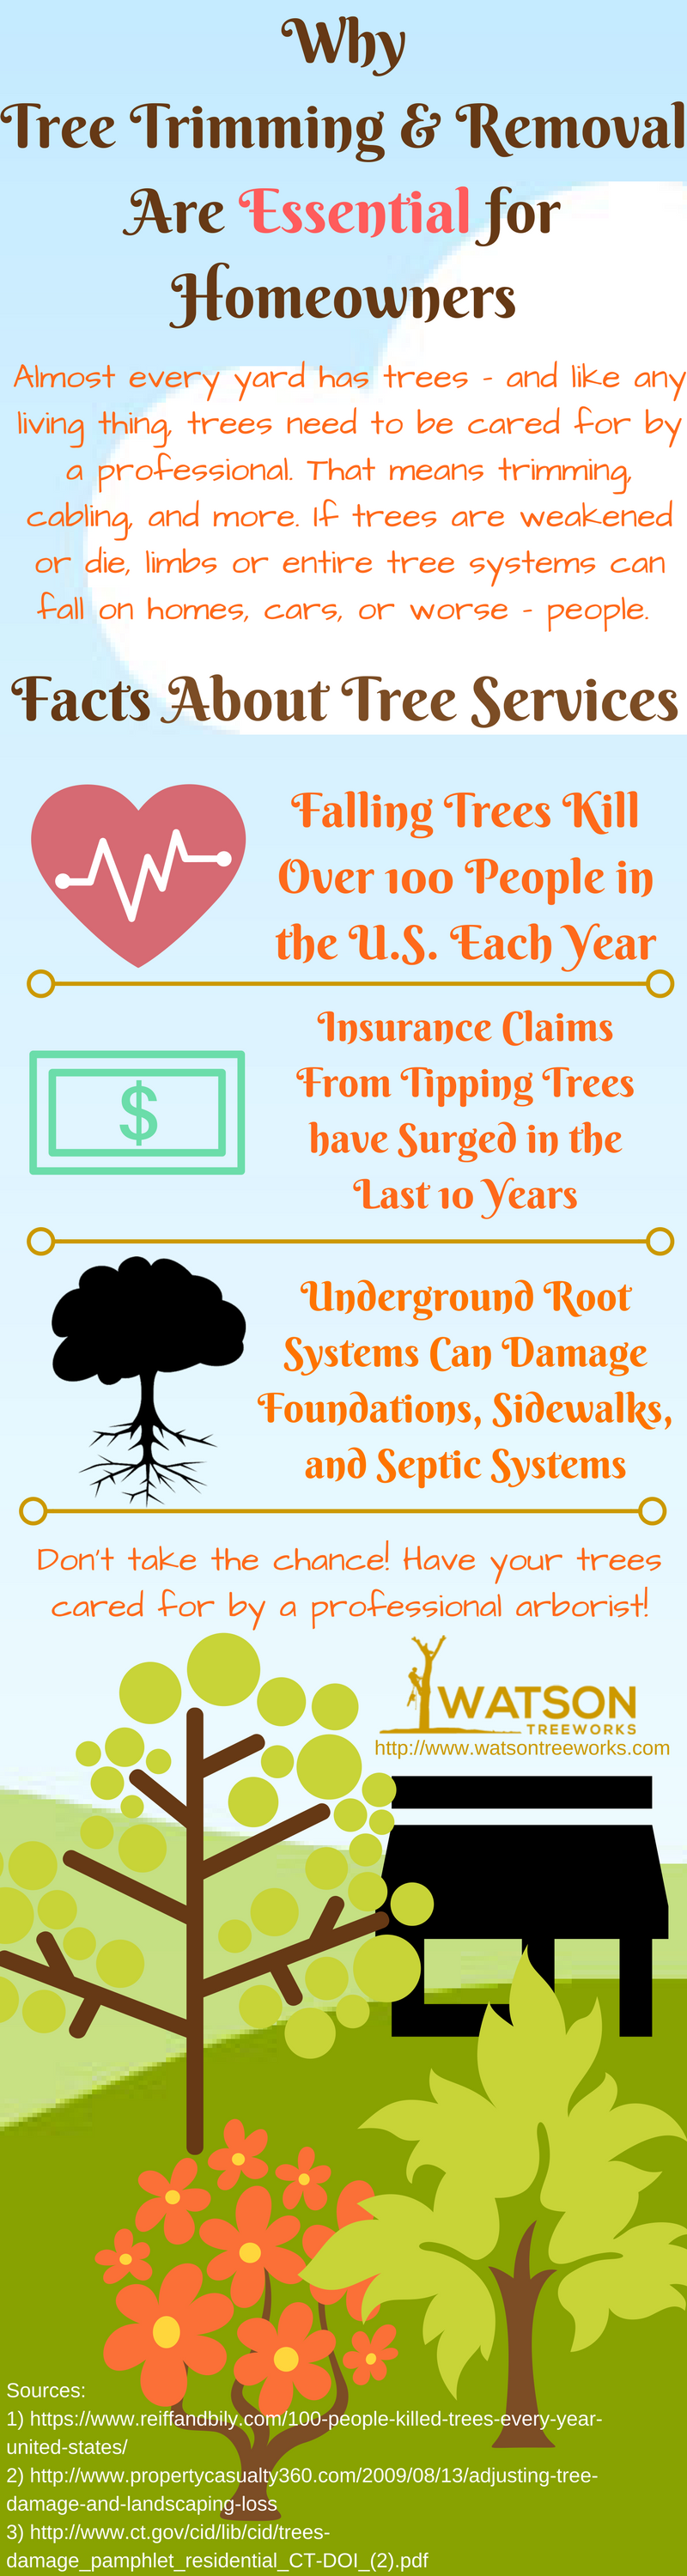 INFOGRAPHIC: Why Tree Trimming & Removal Are Essential for Homeowners